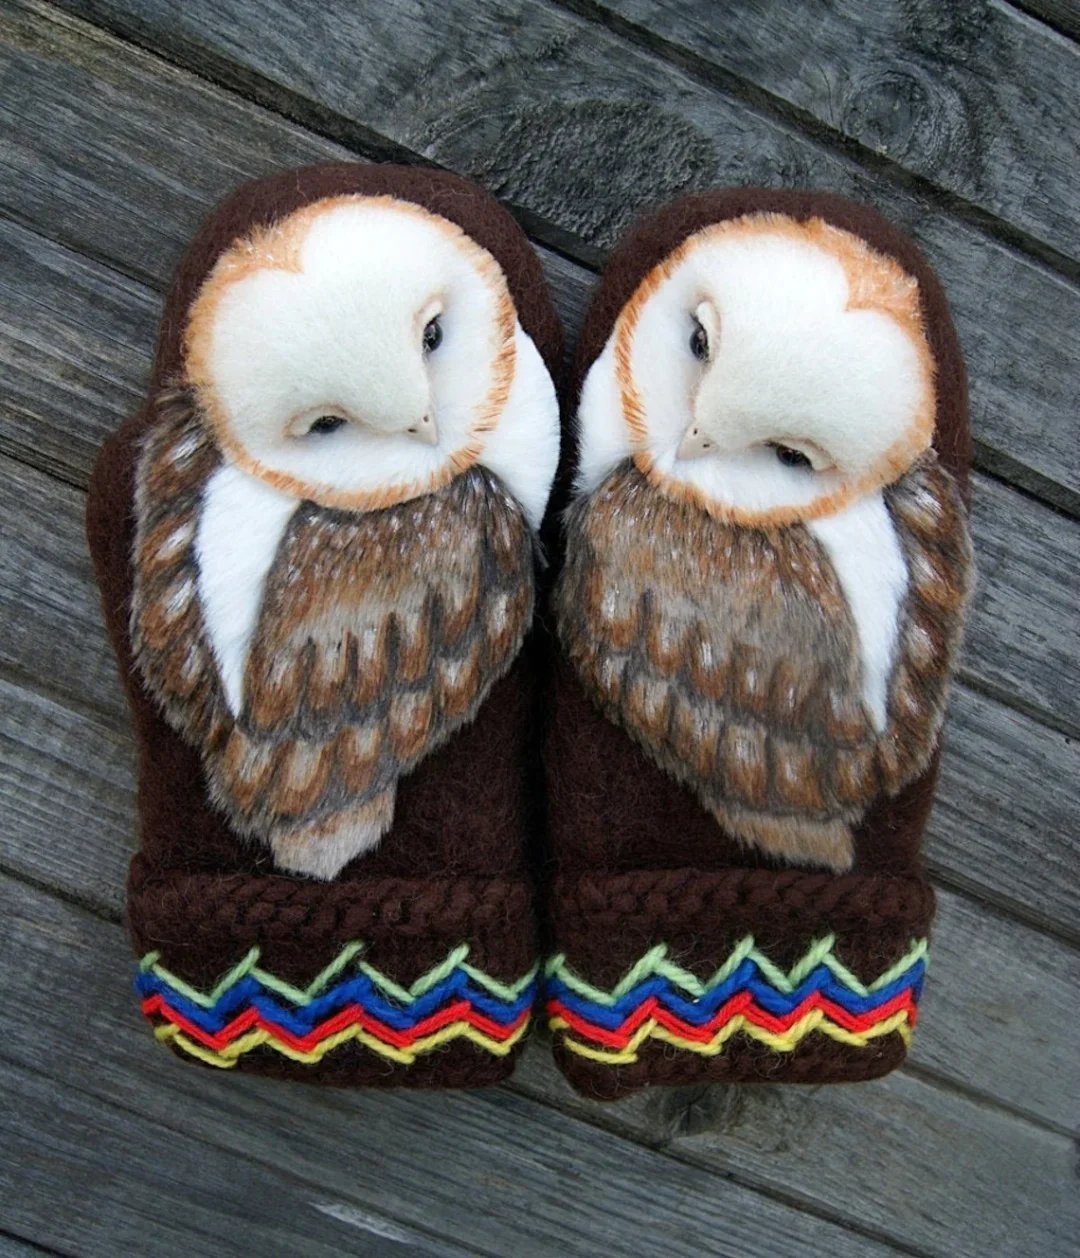 Hand Knitted Wool Nordic Mittens with Owls (Buy 2 Free Shipping)